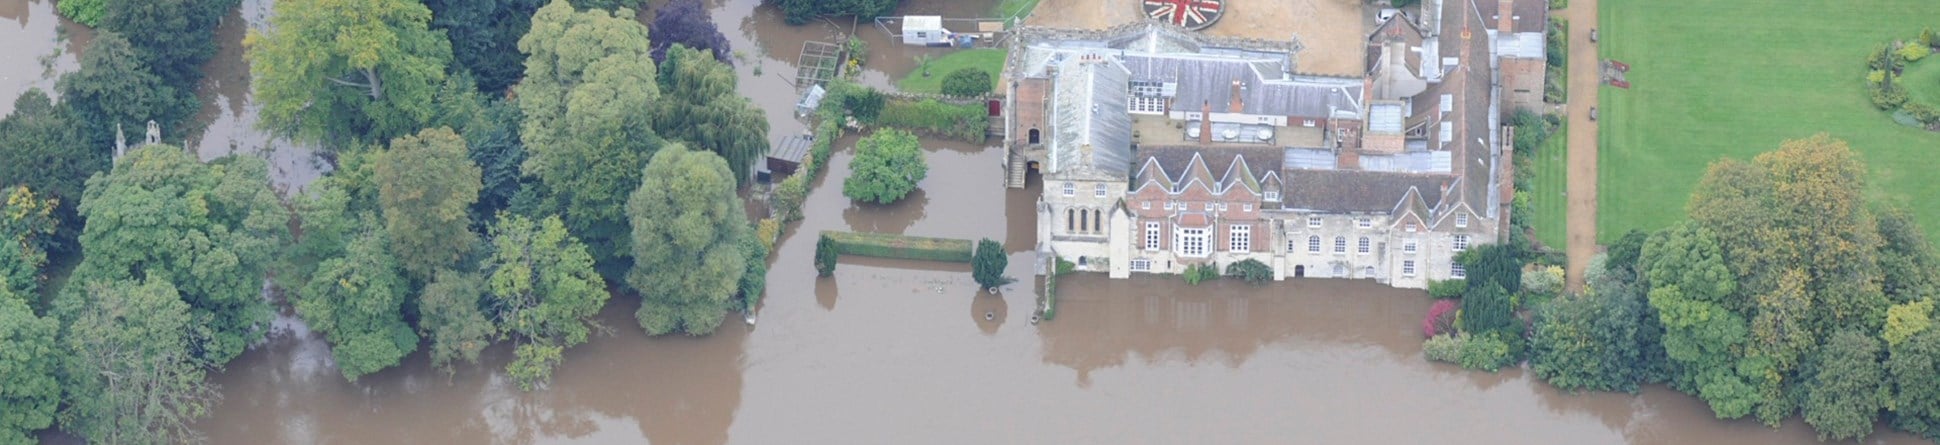 Aerial photograph showing the Archbishop of York's palace in Bishopthorpe with floodwater inundating the ground floor.